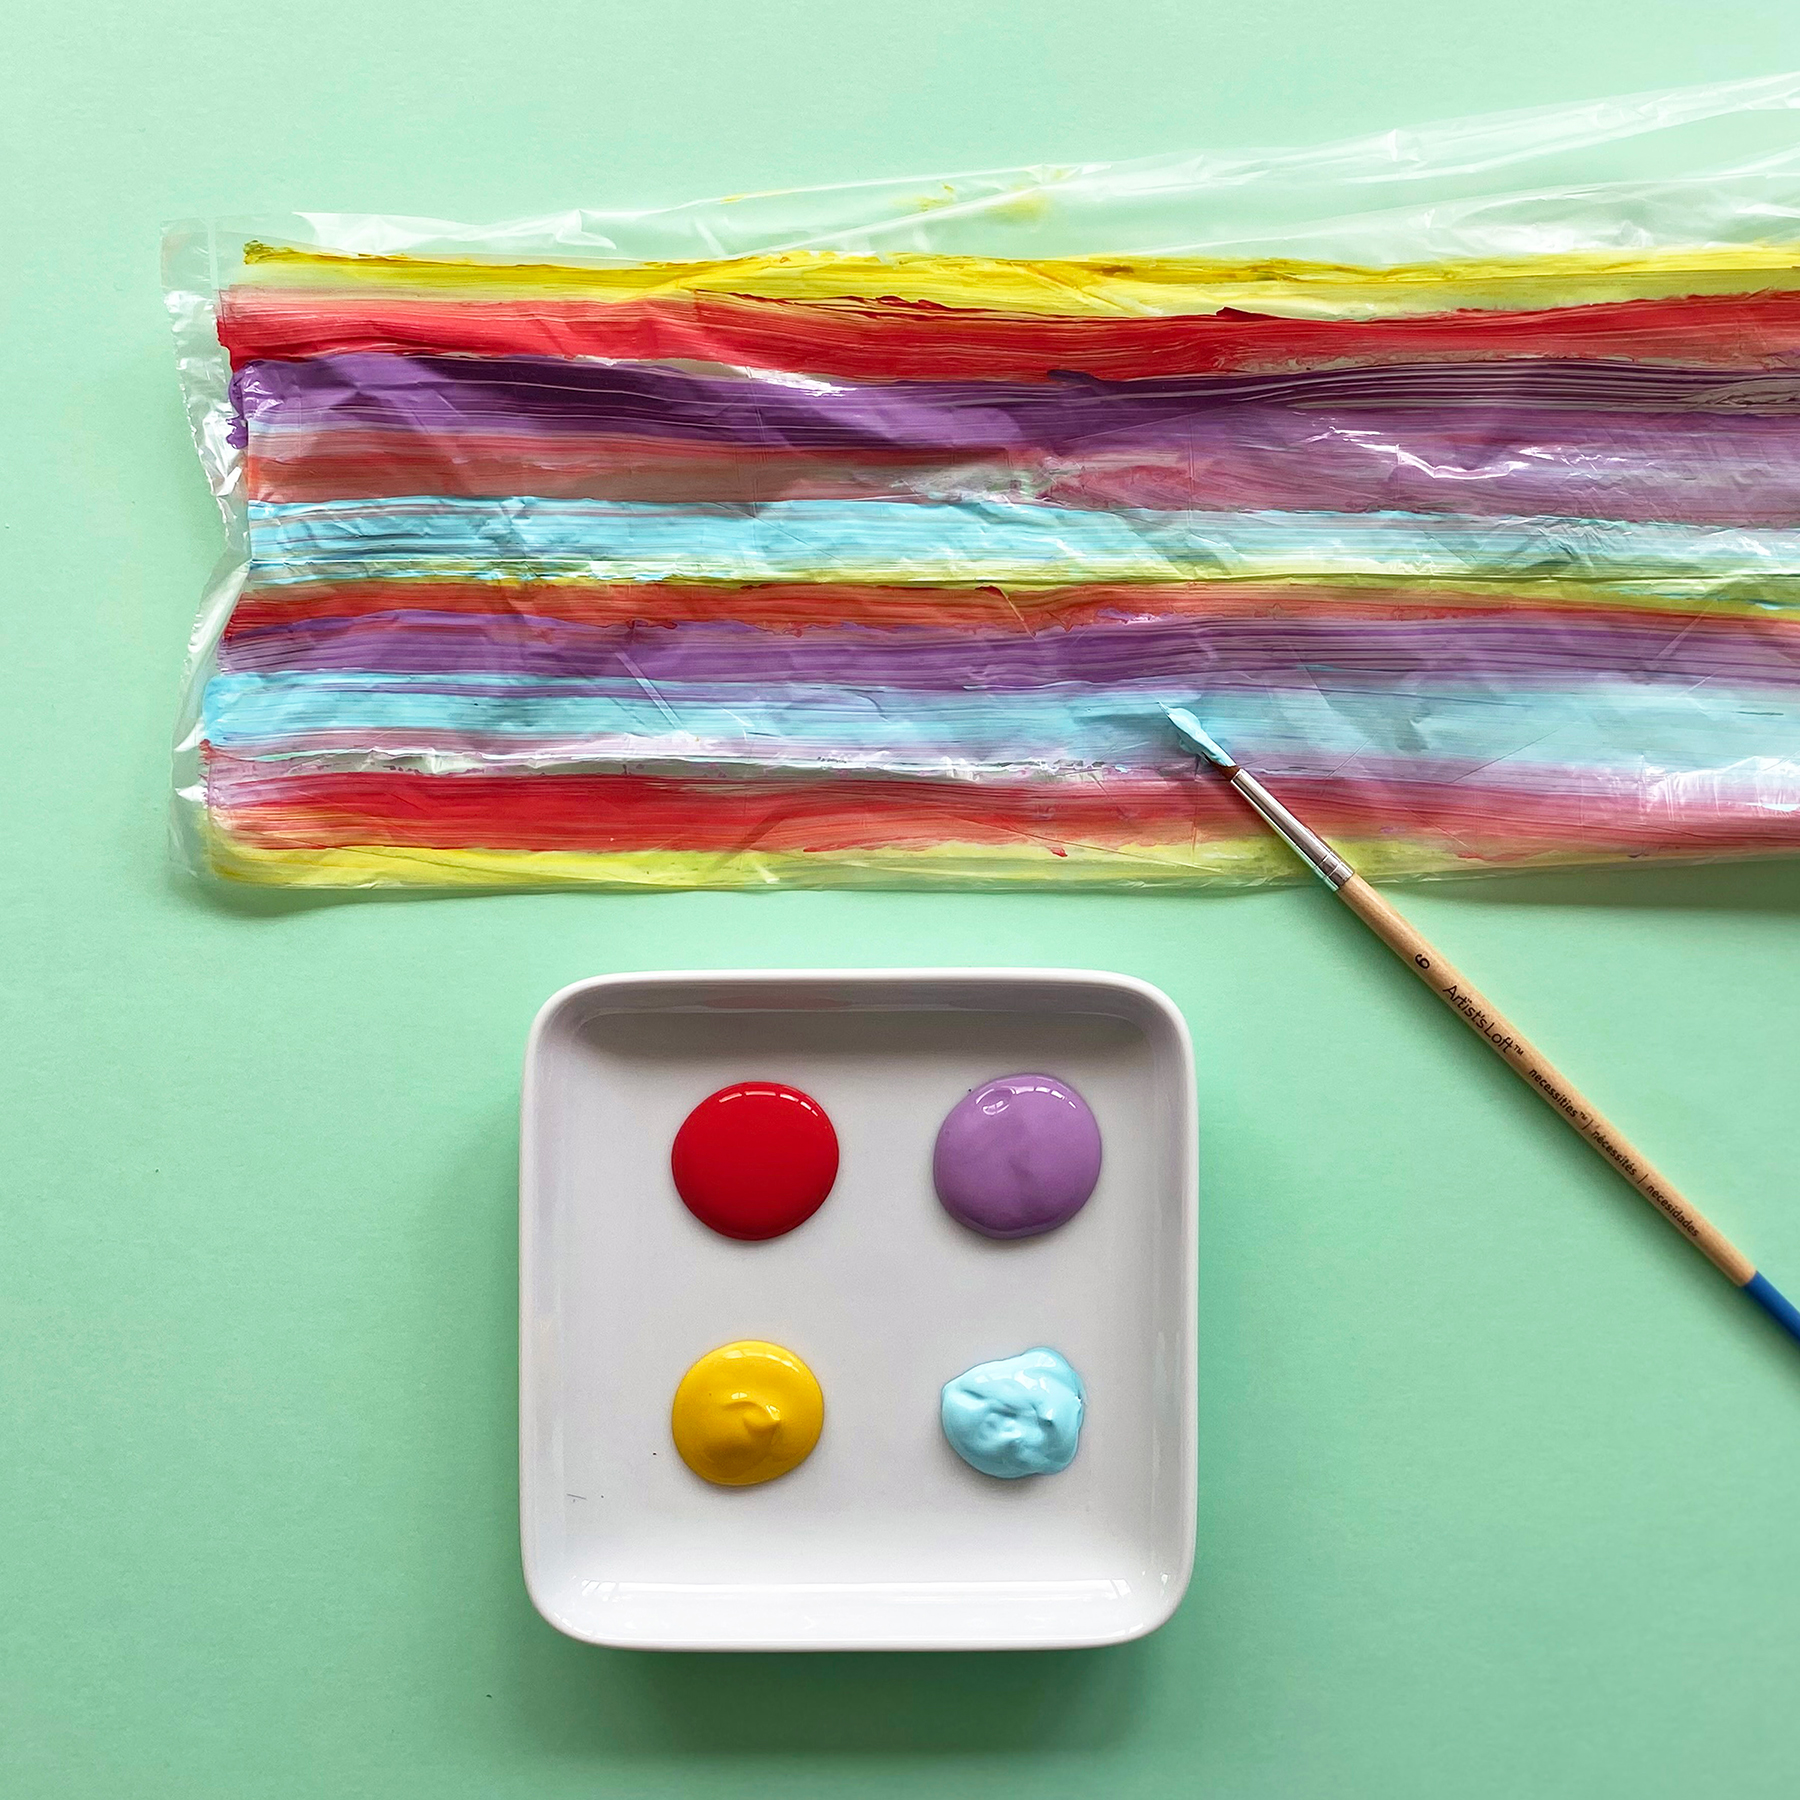 A photo of a piece of cellophane being painted in rainbow colours alongside a dish with paint and a paintbrush on a mint green background